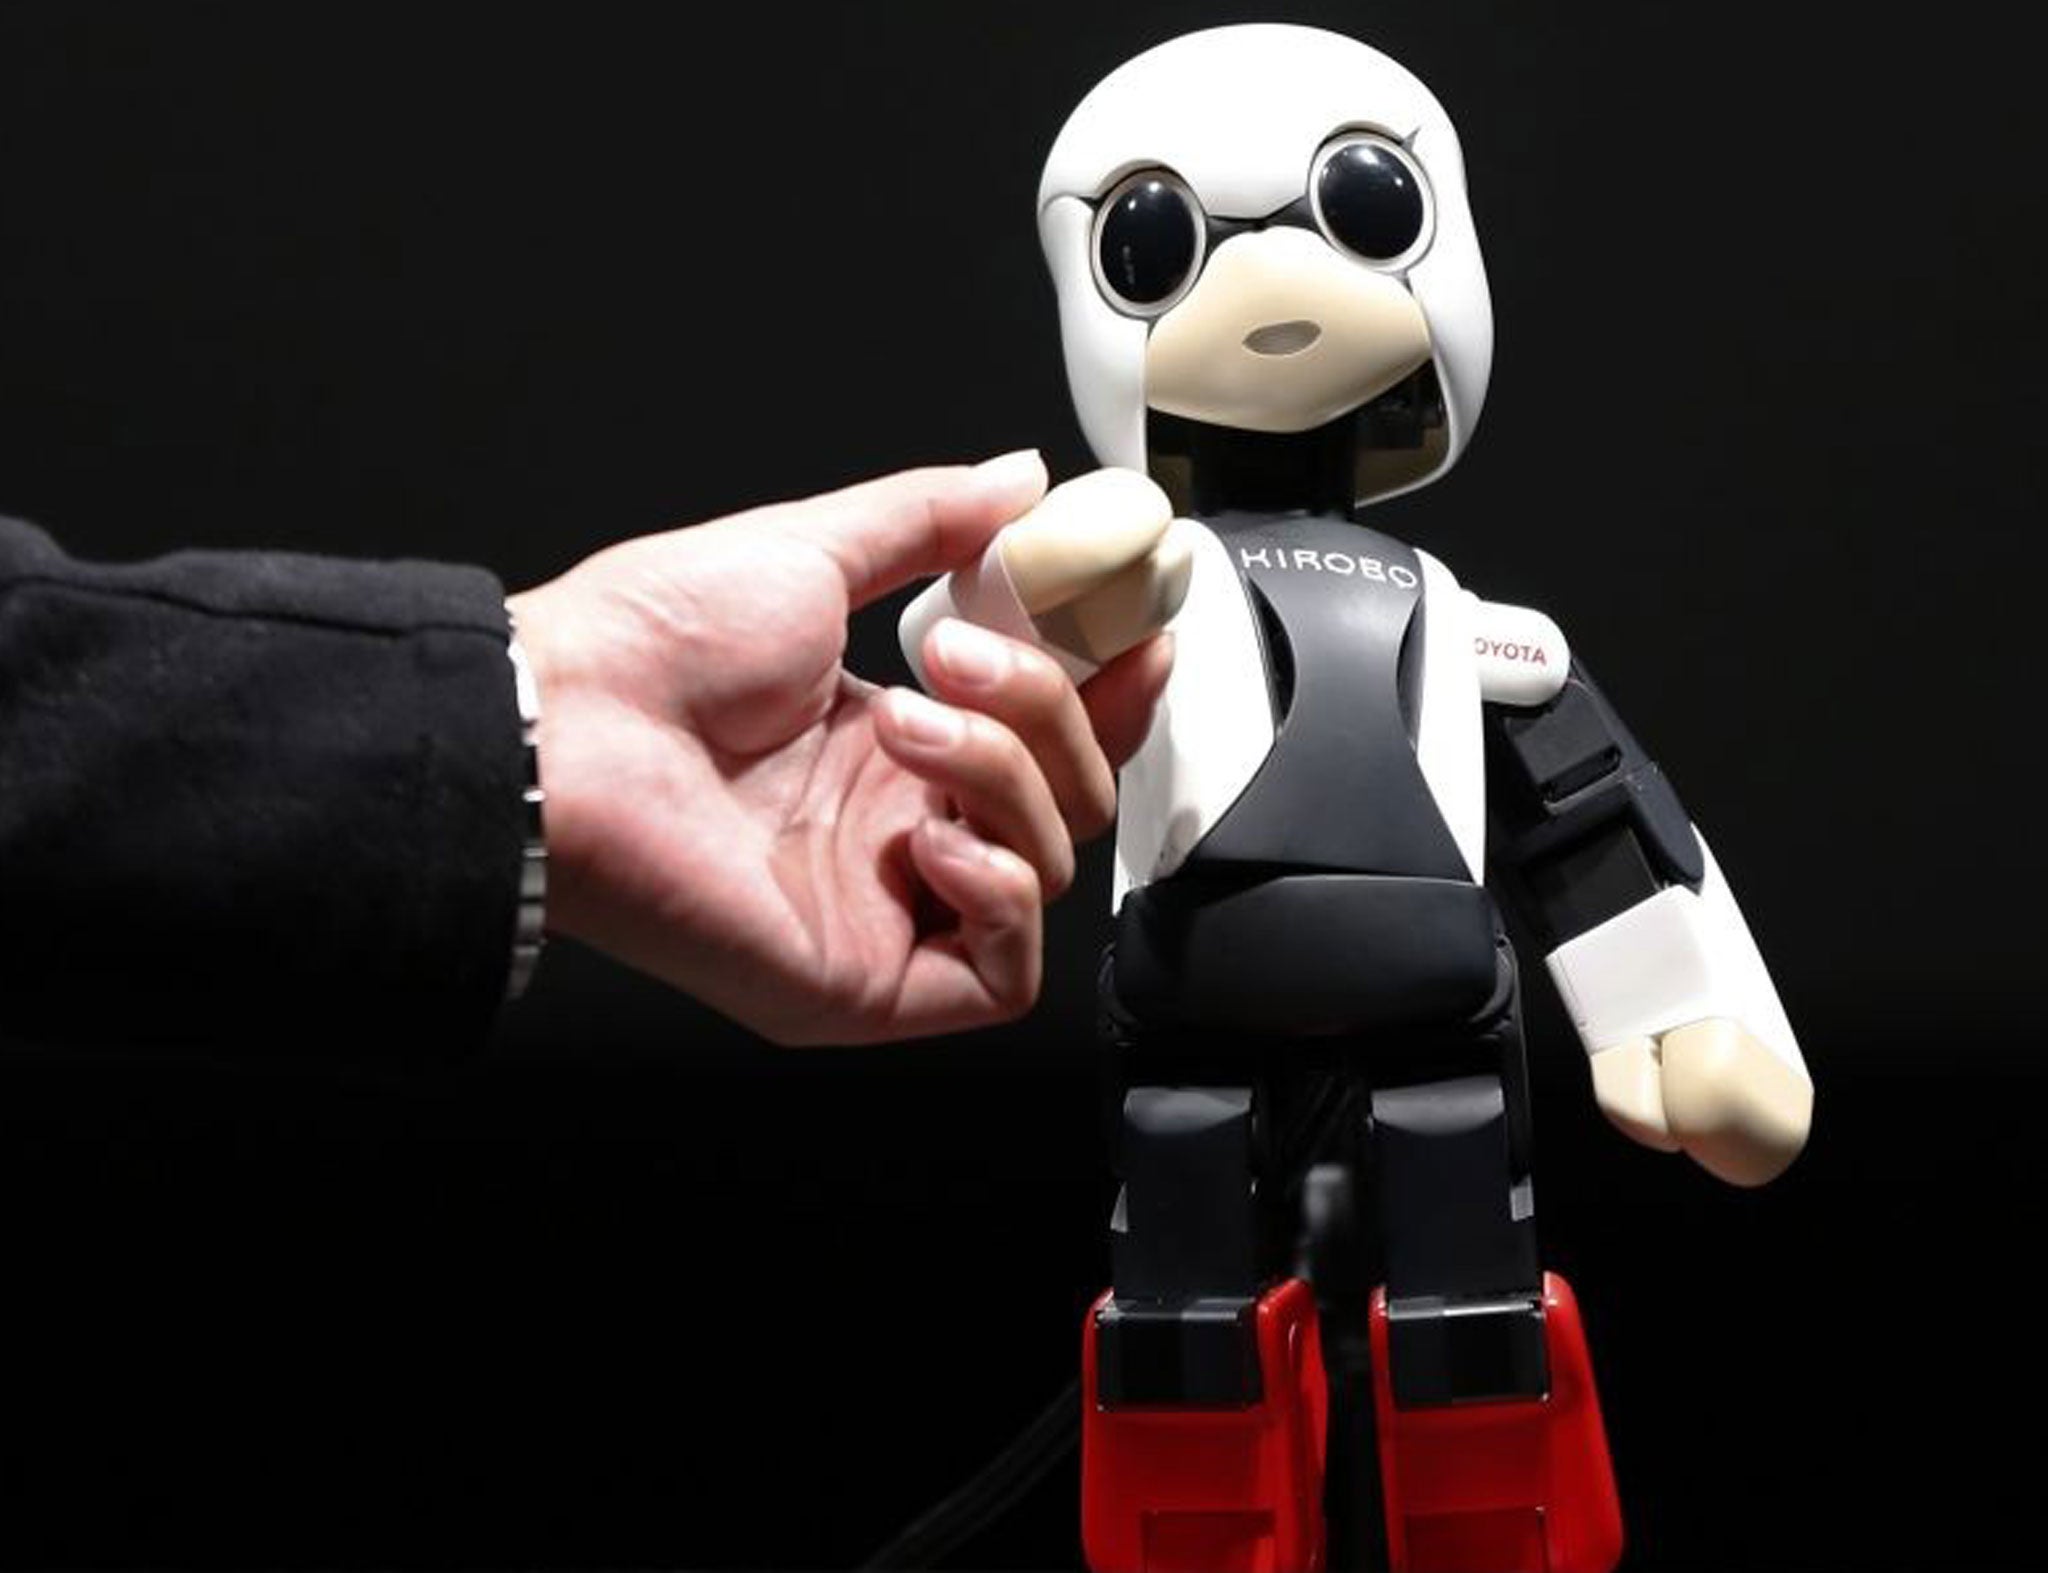 Kirobo is designed to provide companionship for a Japanese astronaut at the International Space Station